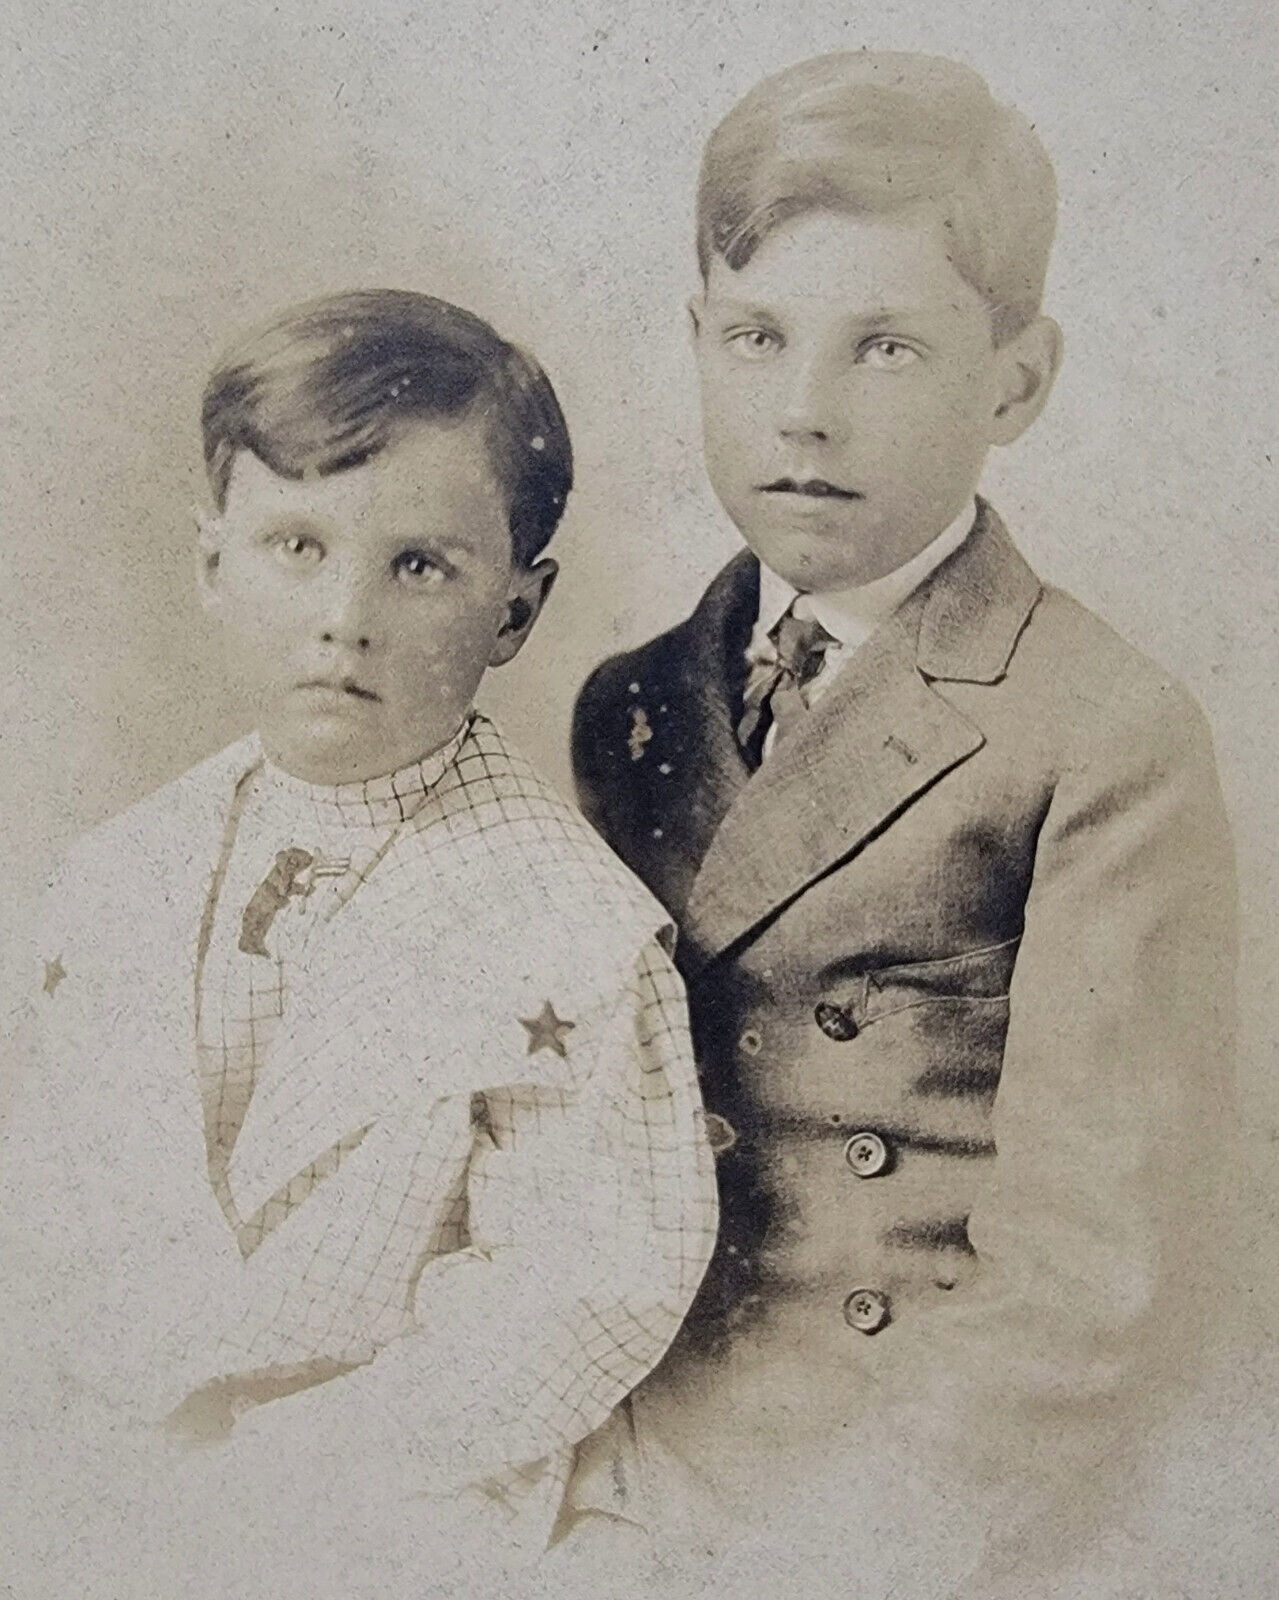 Antique Photograph Portrait Two Young Brothers In Suits Sepia Vandalia, Illinois